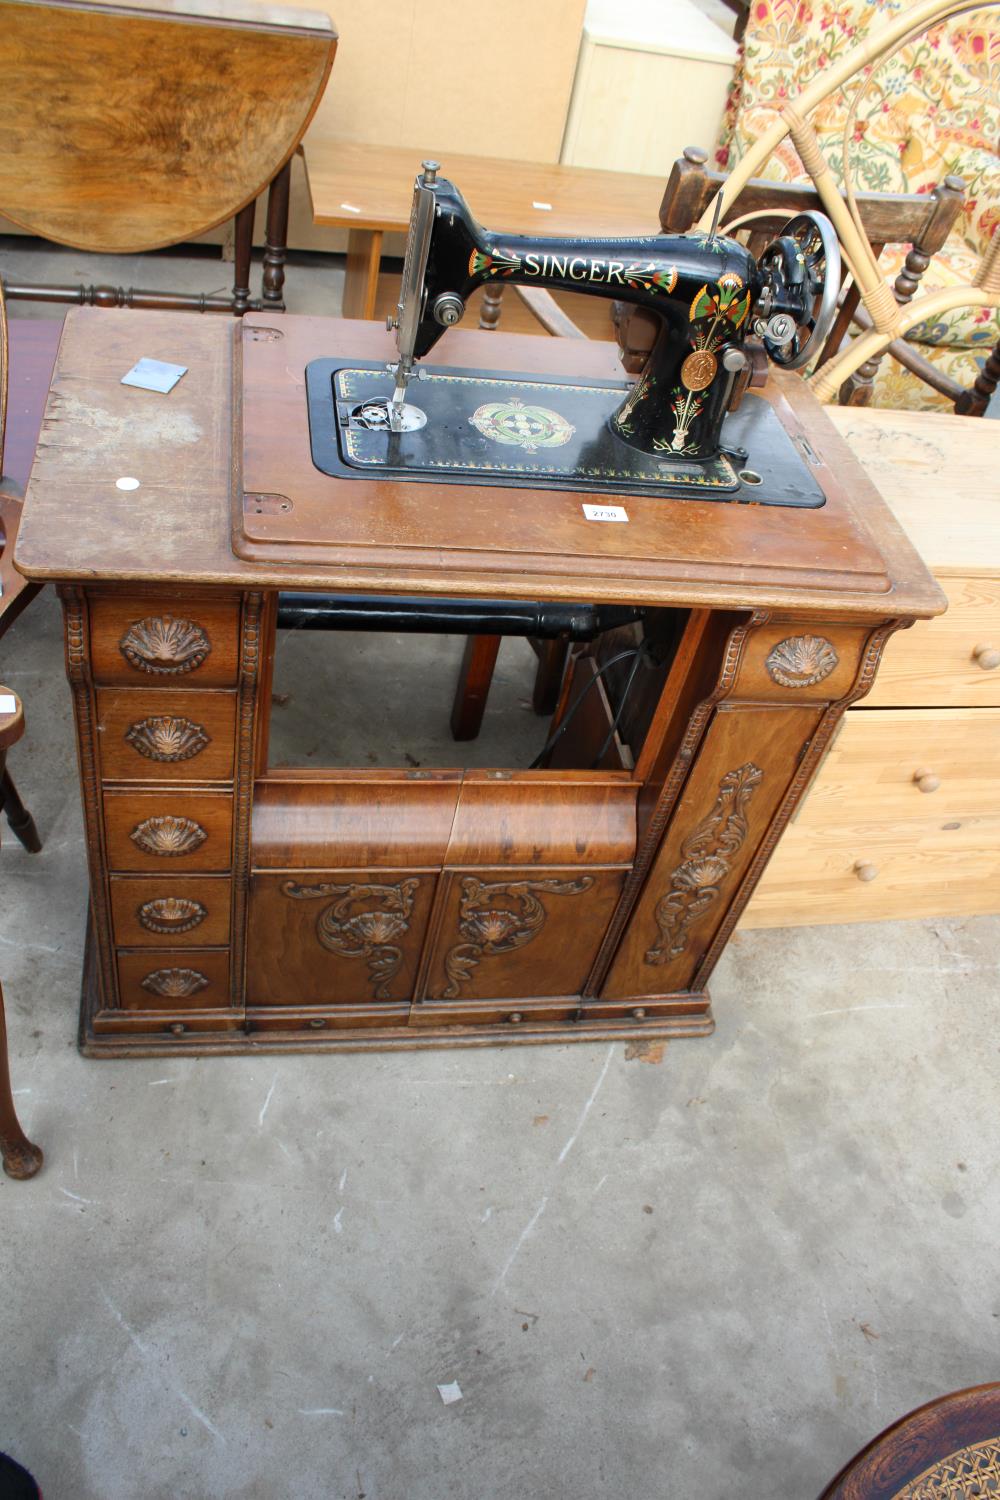 A SINGER SEWING MACHINE (F6827139) IN CABINET